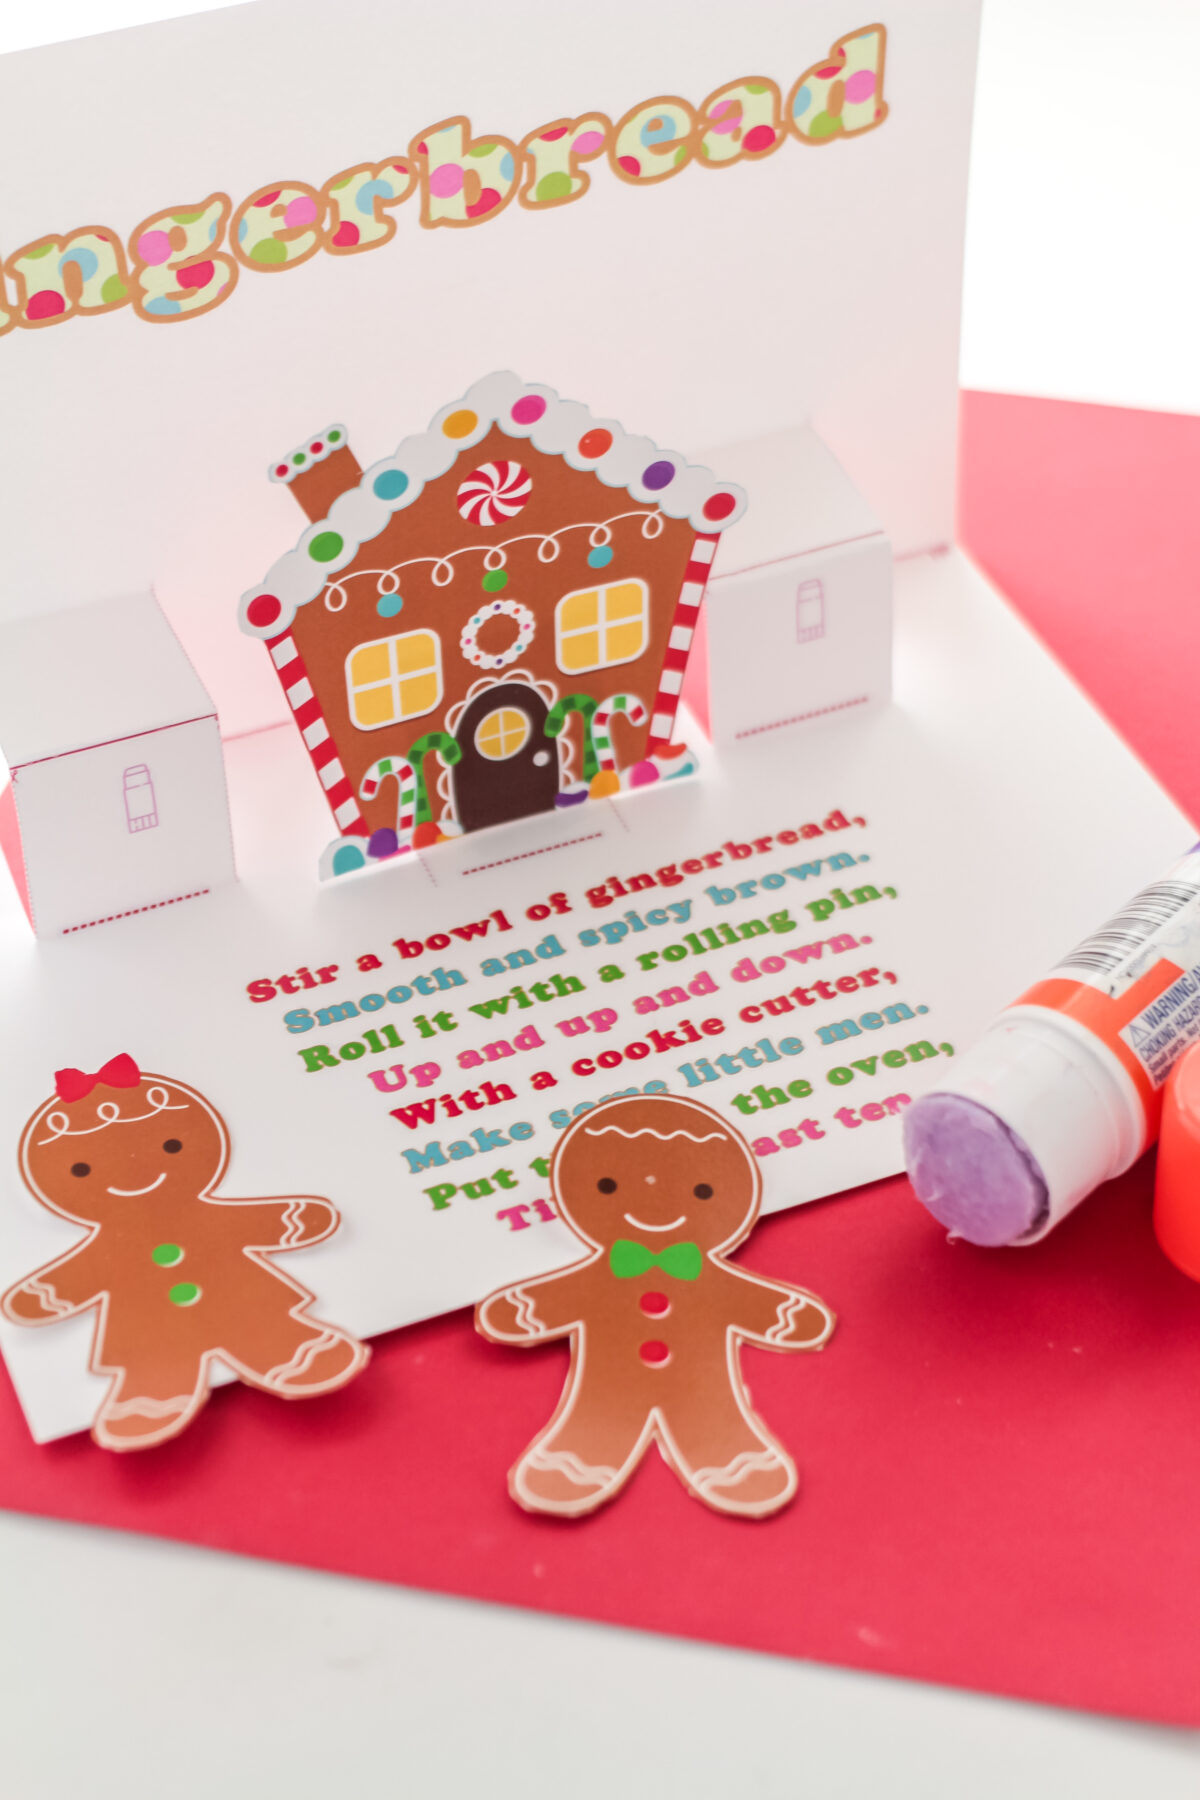 Gluing the gingerbread cookies cut outs onto the card,